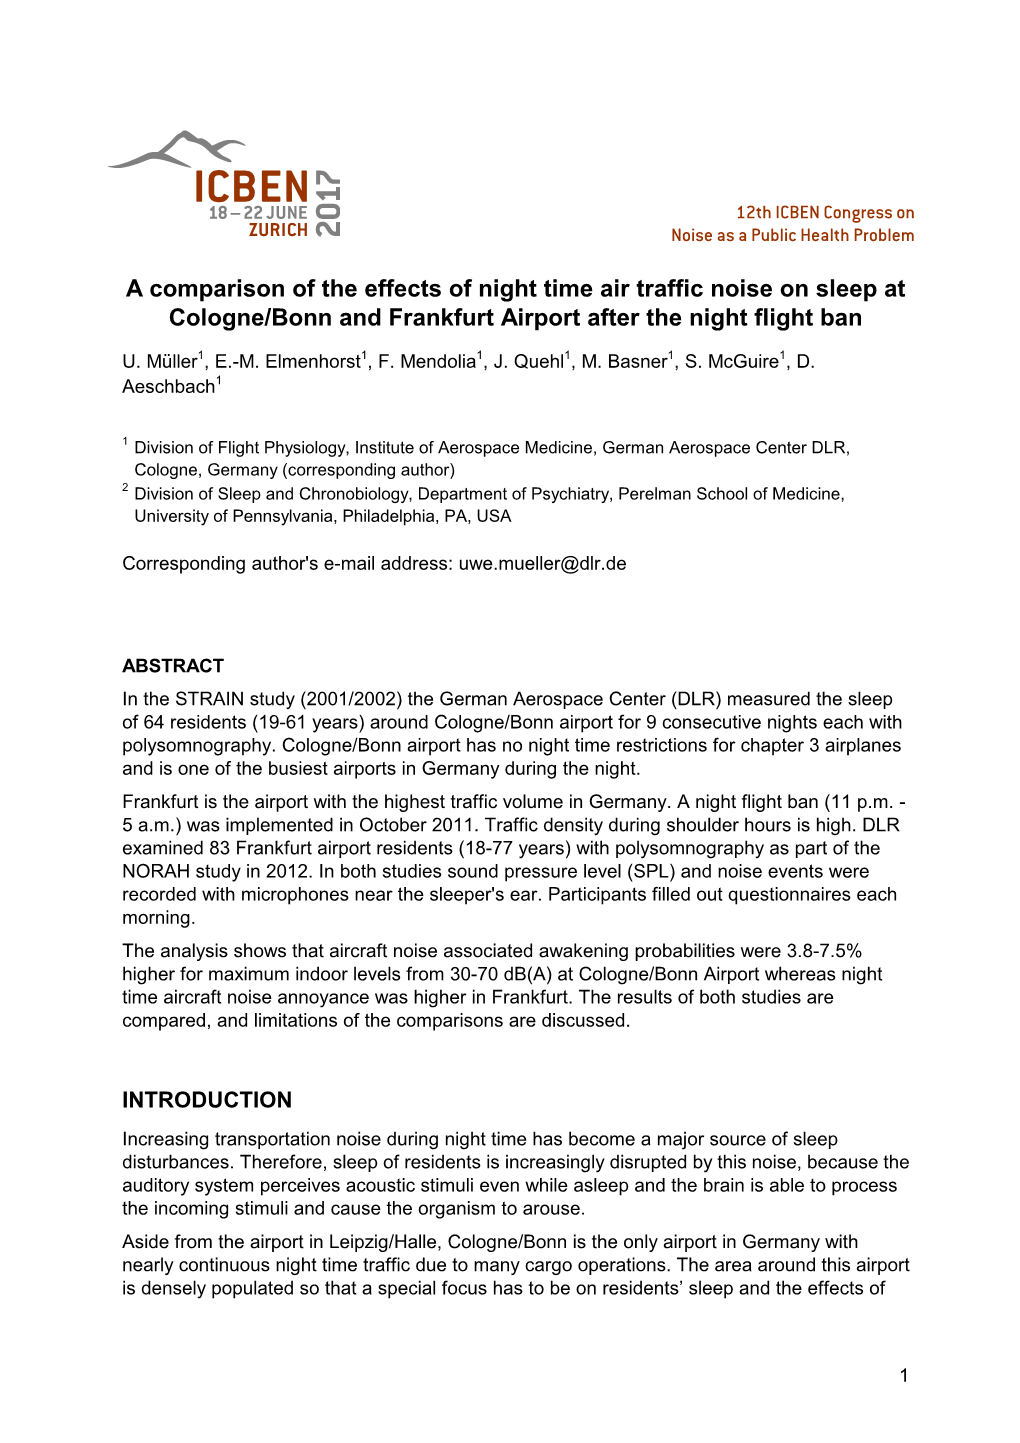 A Comparison of the Effects of Night Time Air Traffic Noise on Sleep at Cologne/Bonn and Frankfurt Airport After the Night Flight Ban